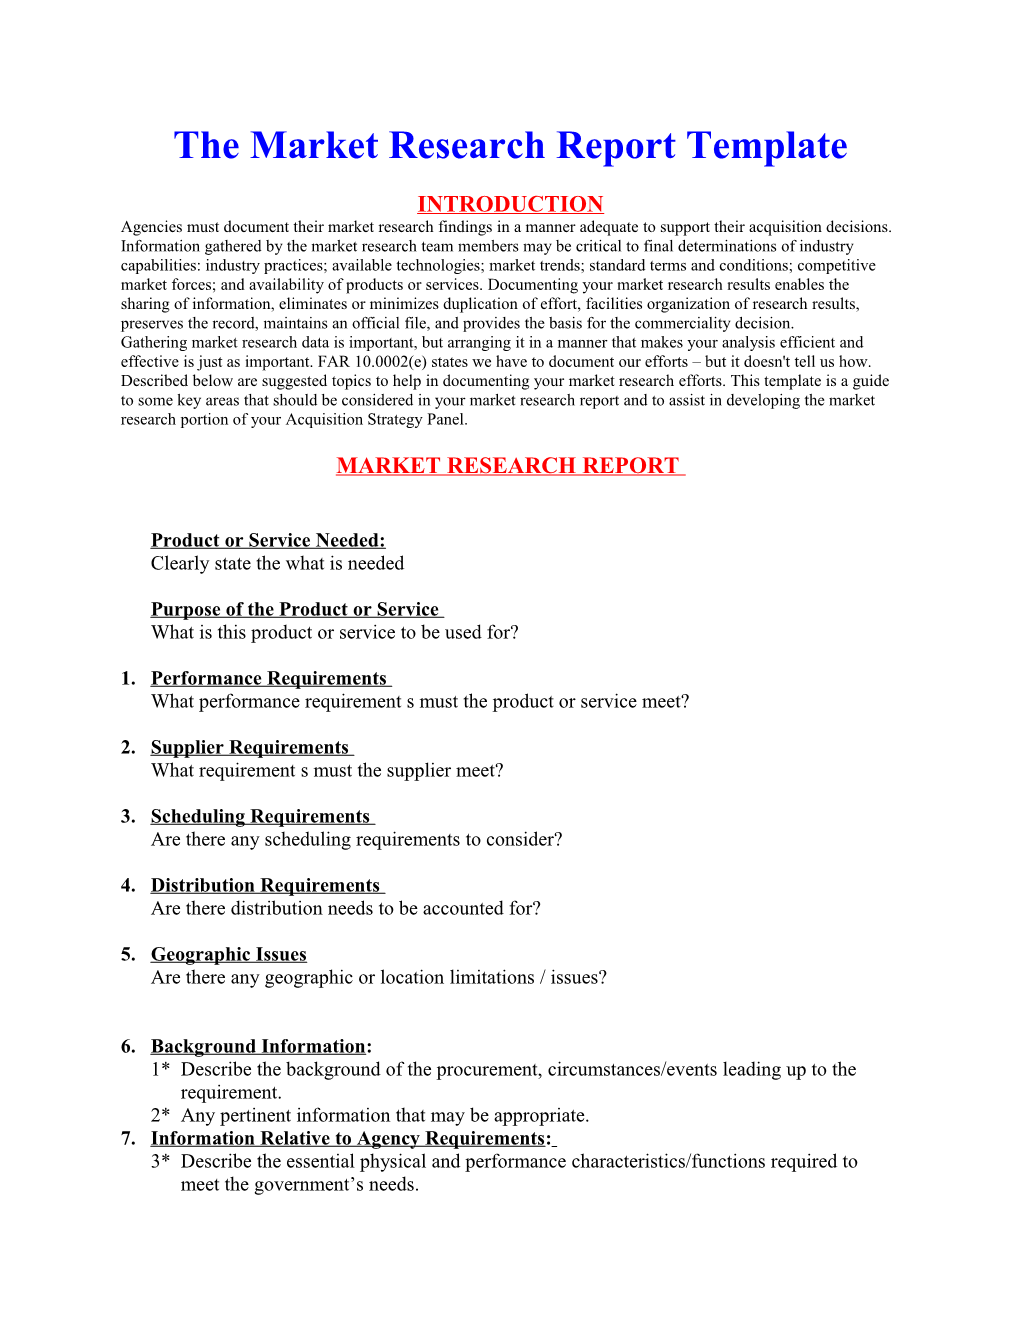 Documentation - the Market Research Report